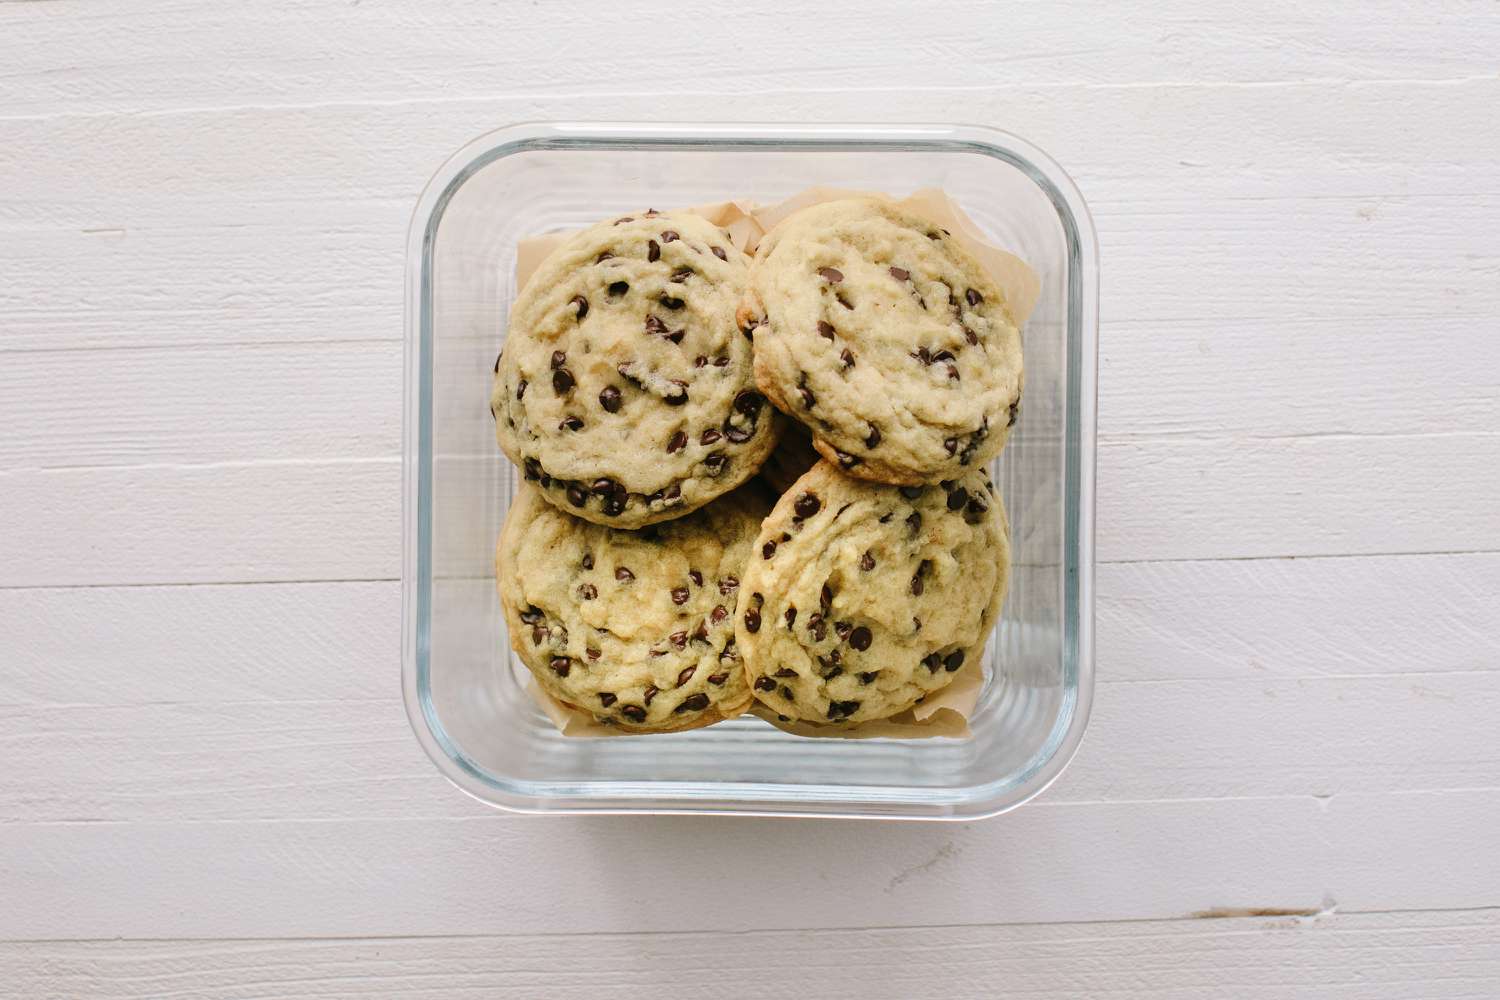 Baked cookies in a container